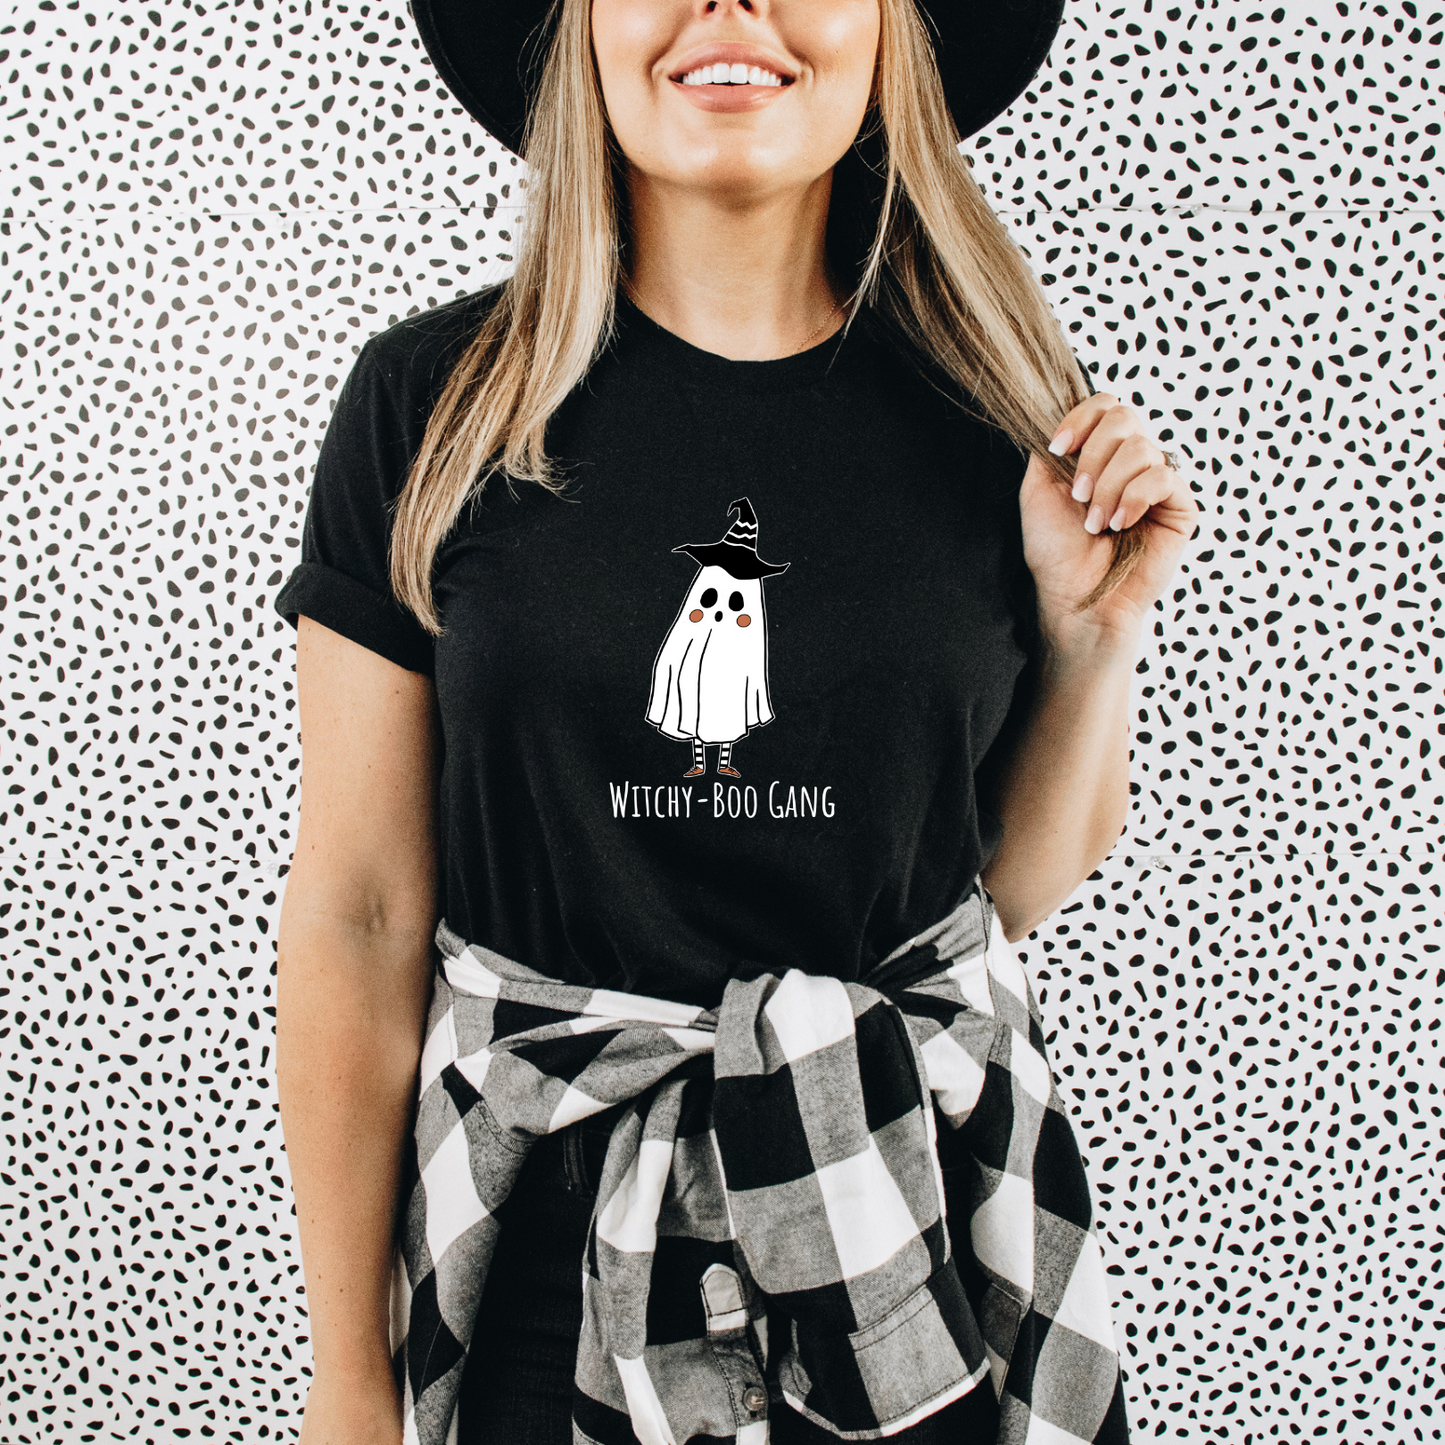 Witchy-Boo Gang Tee